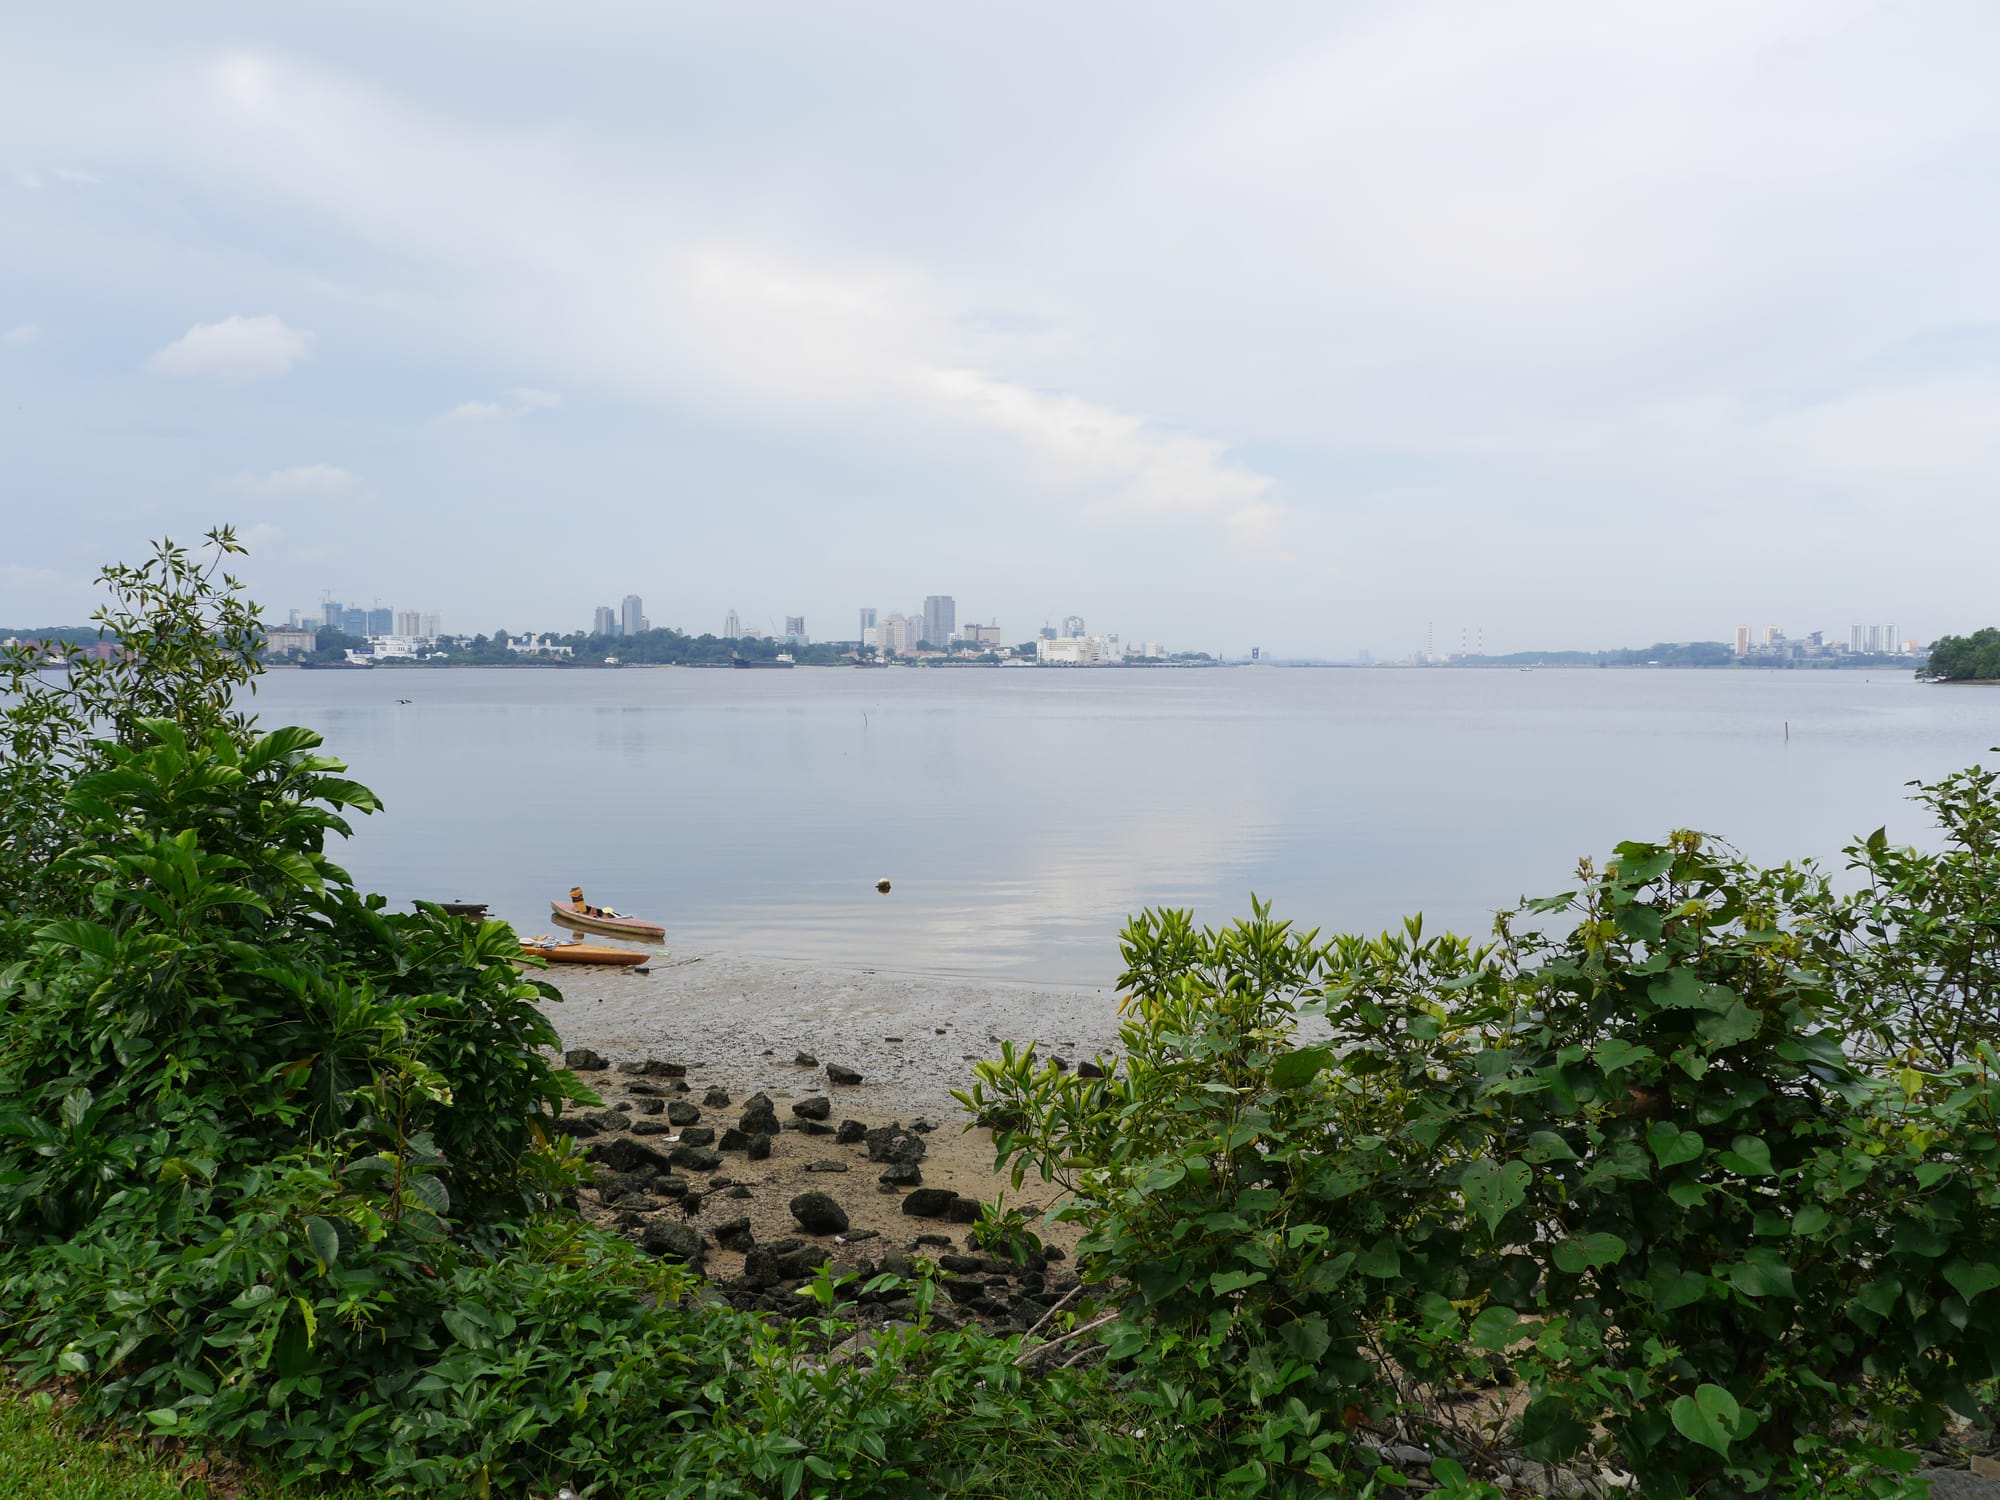 Photo by Author — looking across the water to Johor Bahru, Malaysia from Kranji Beach Battle Site park, Singapore